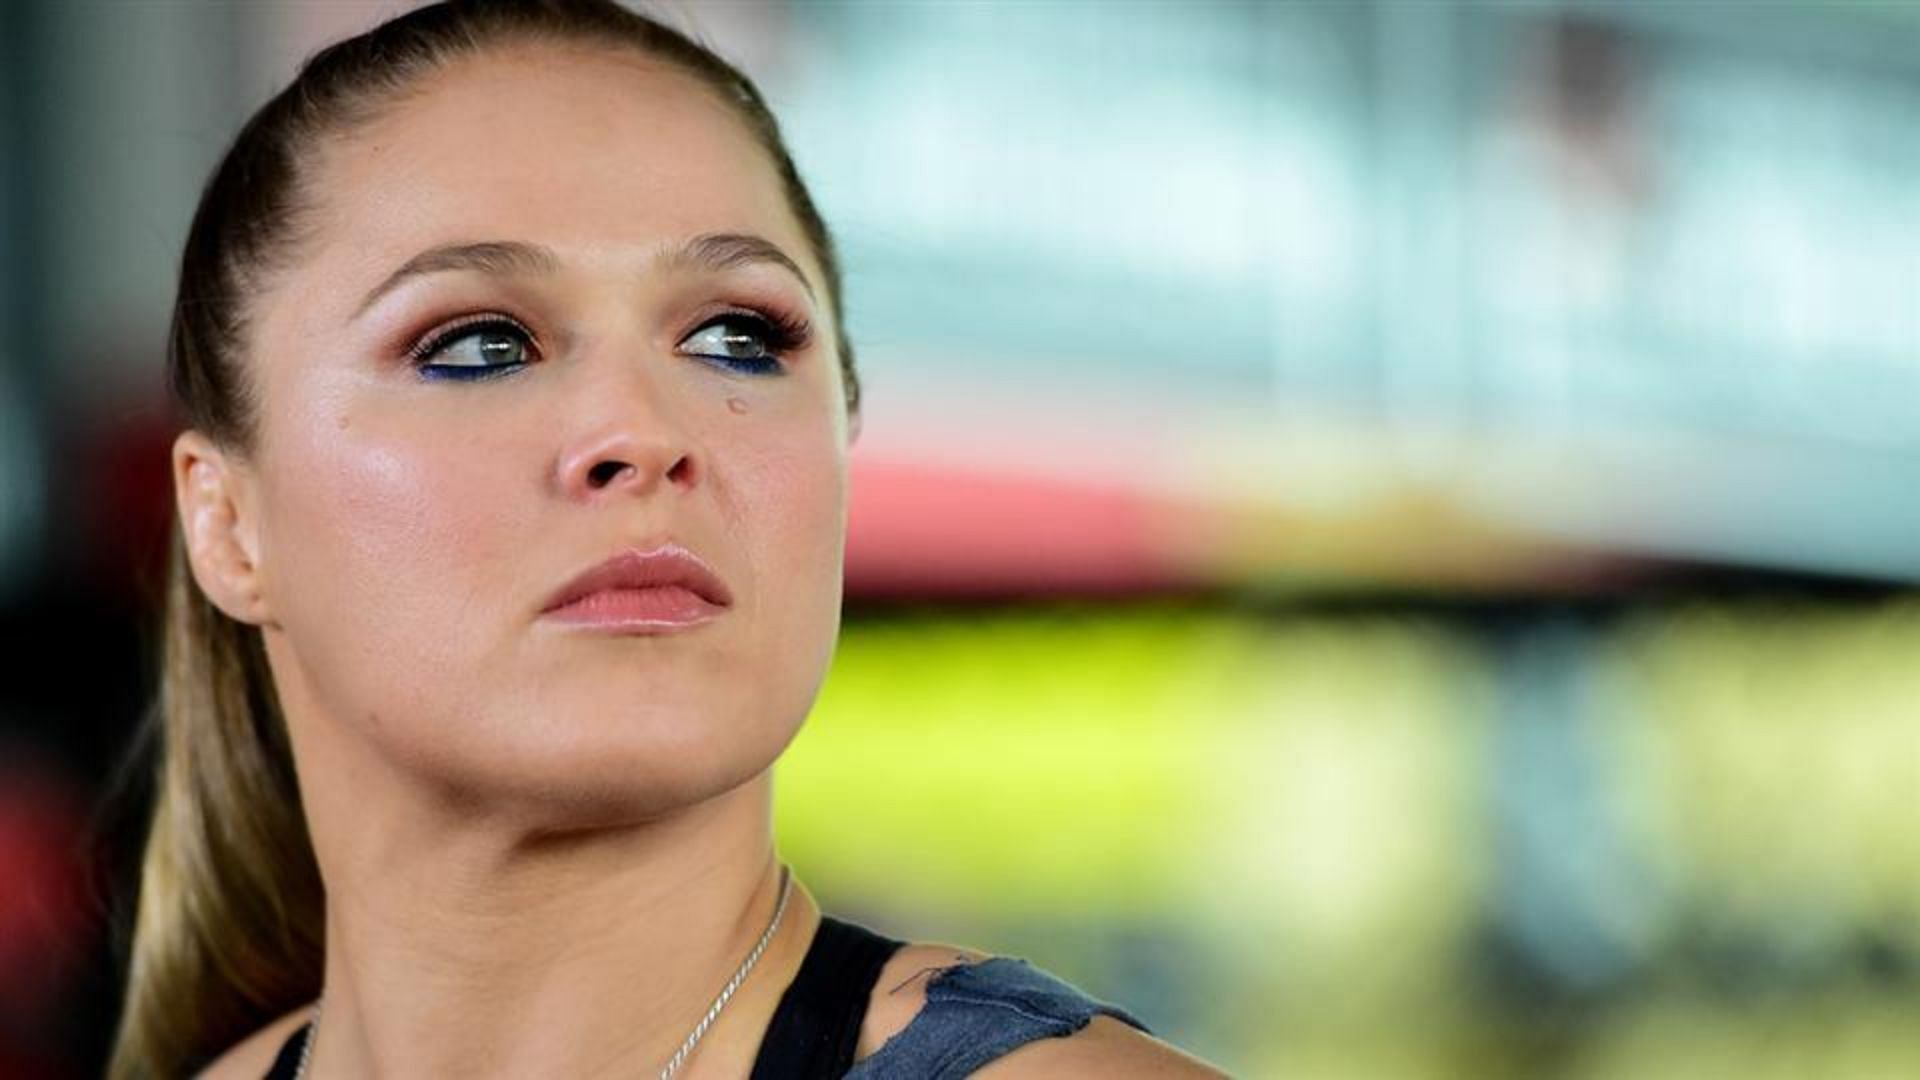 Ronda Rousey made her WWE debut in 2018.